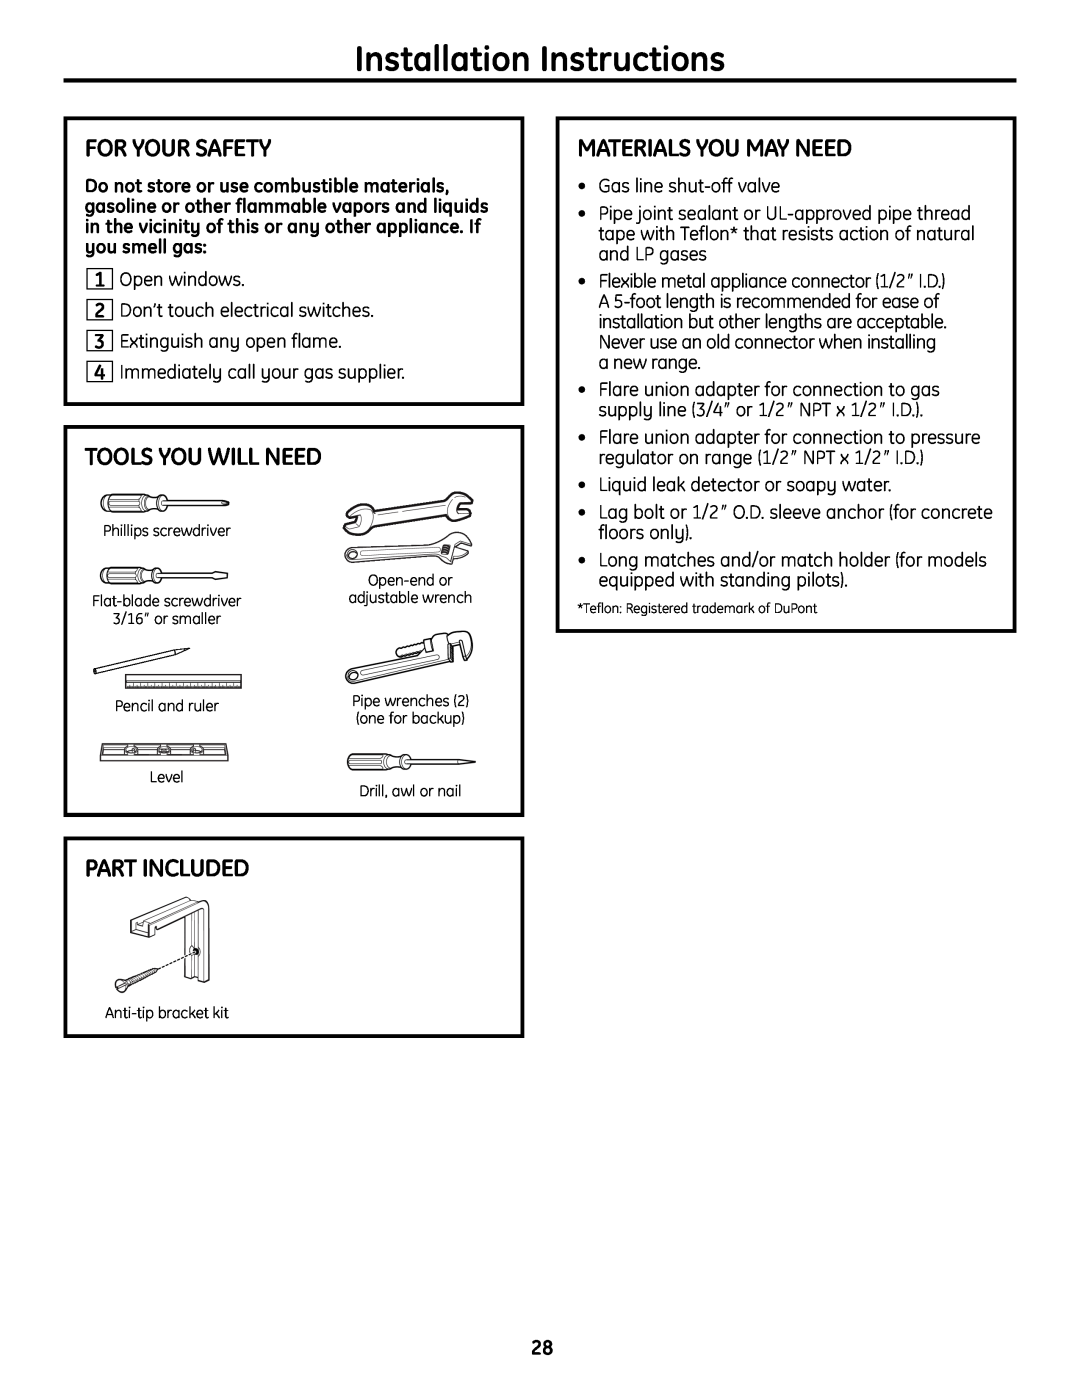 GE JGBS19 Installation Instructions, For Your Safety, Tools You Will Need, Part Included, Materials You May Need 